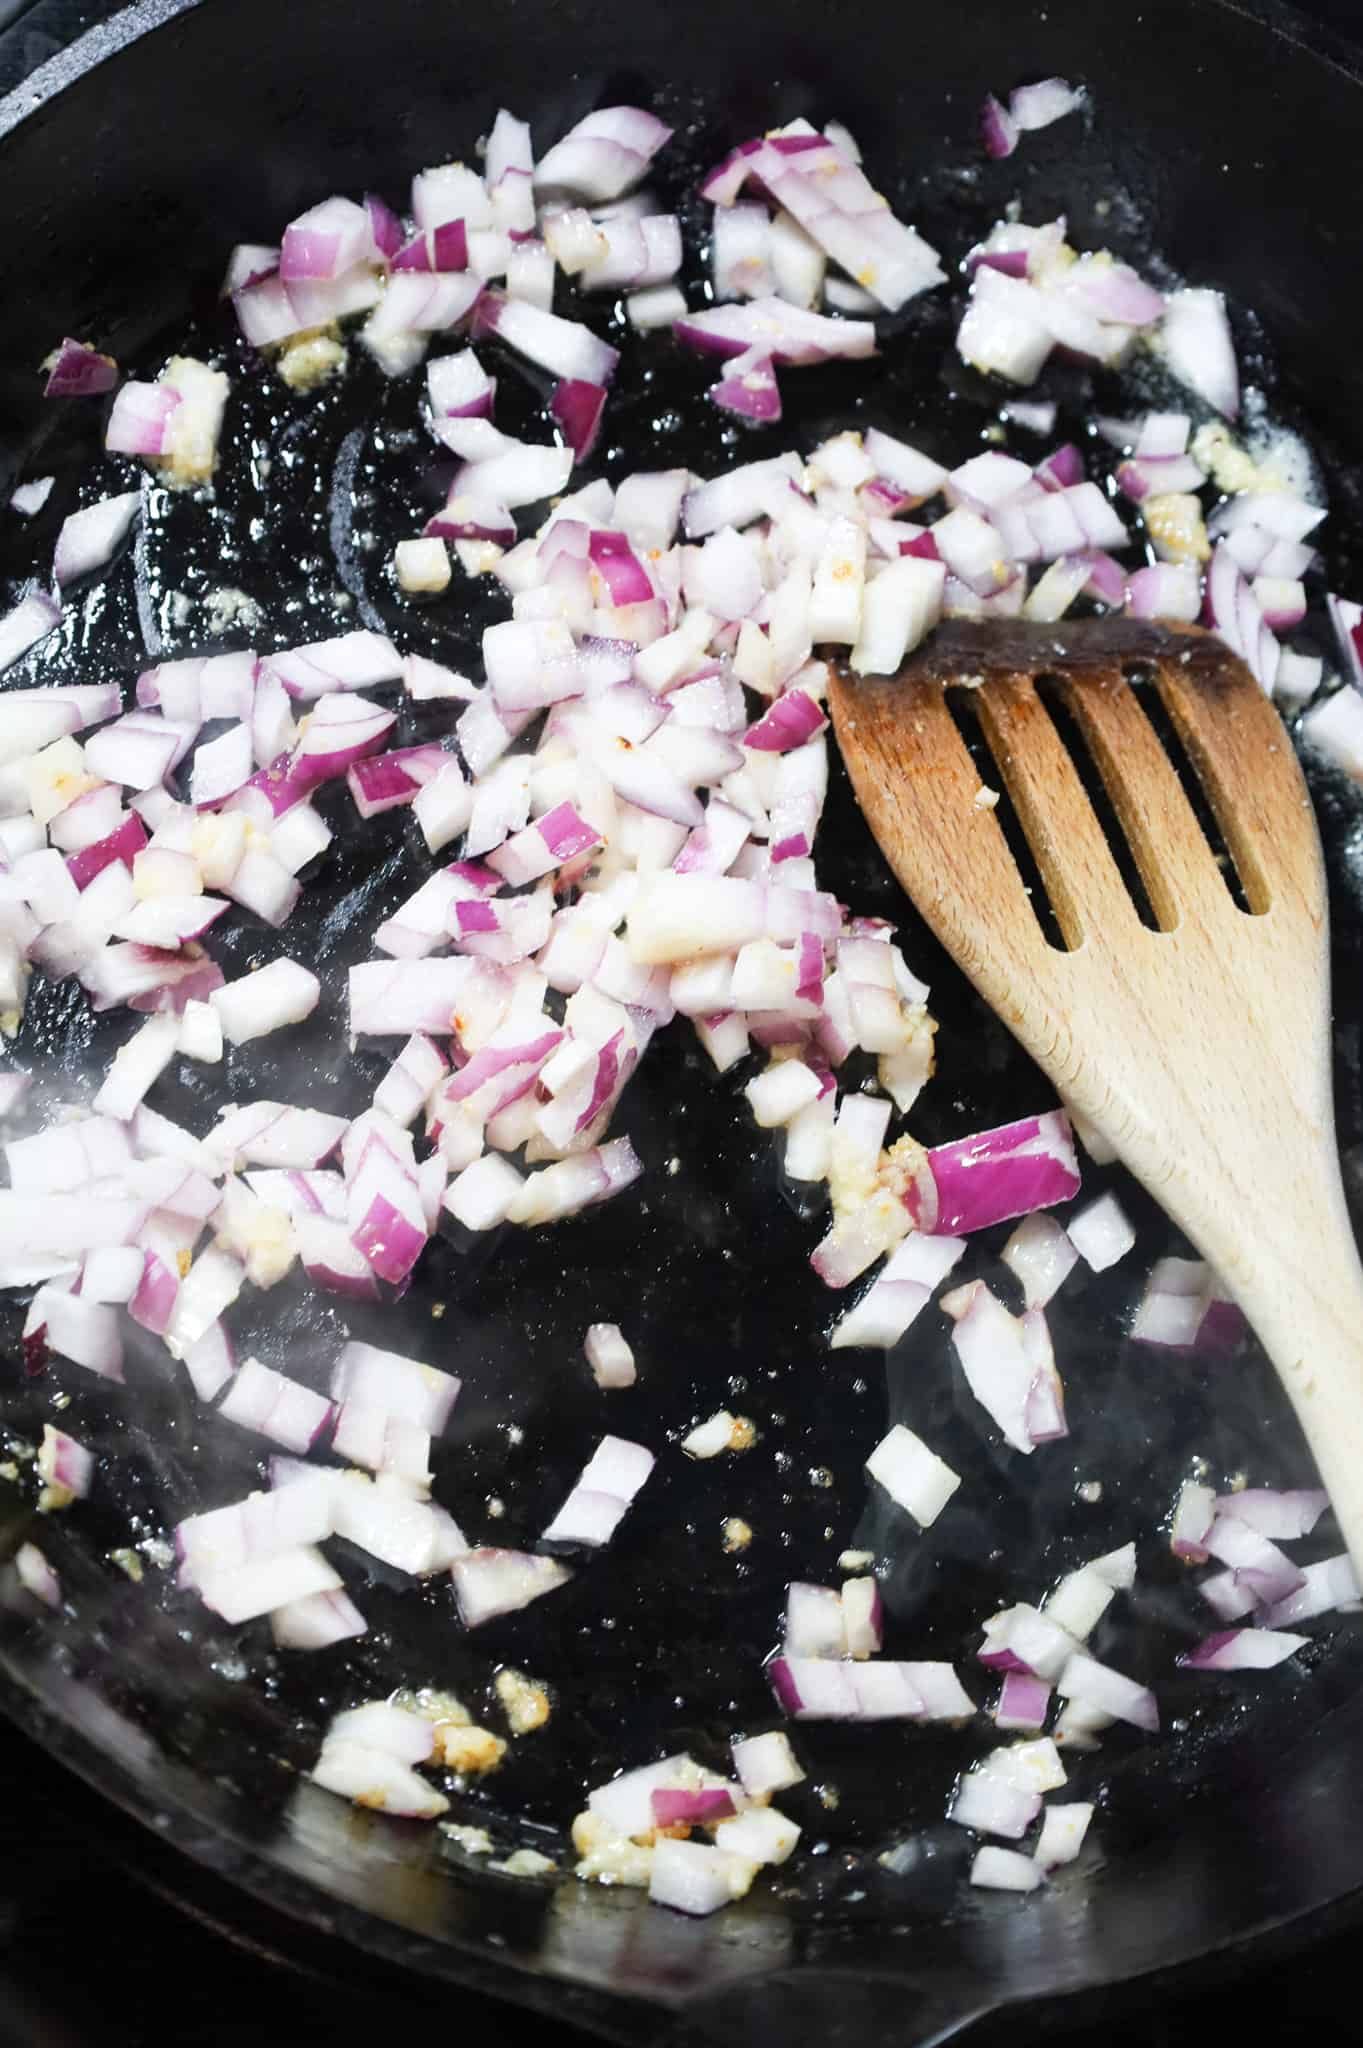 stirring together diced red onions, garlic puree and melted butter in a cast iron skillet